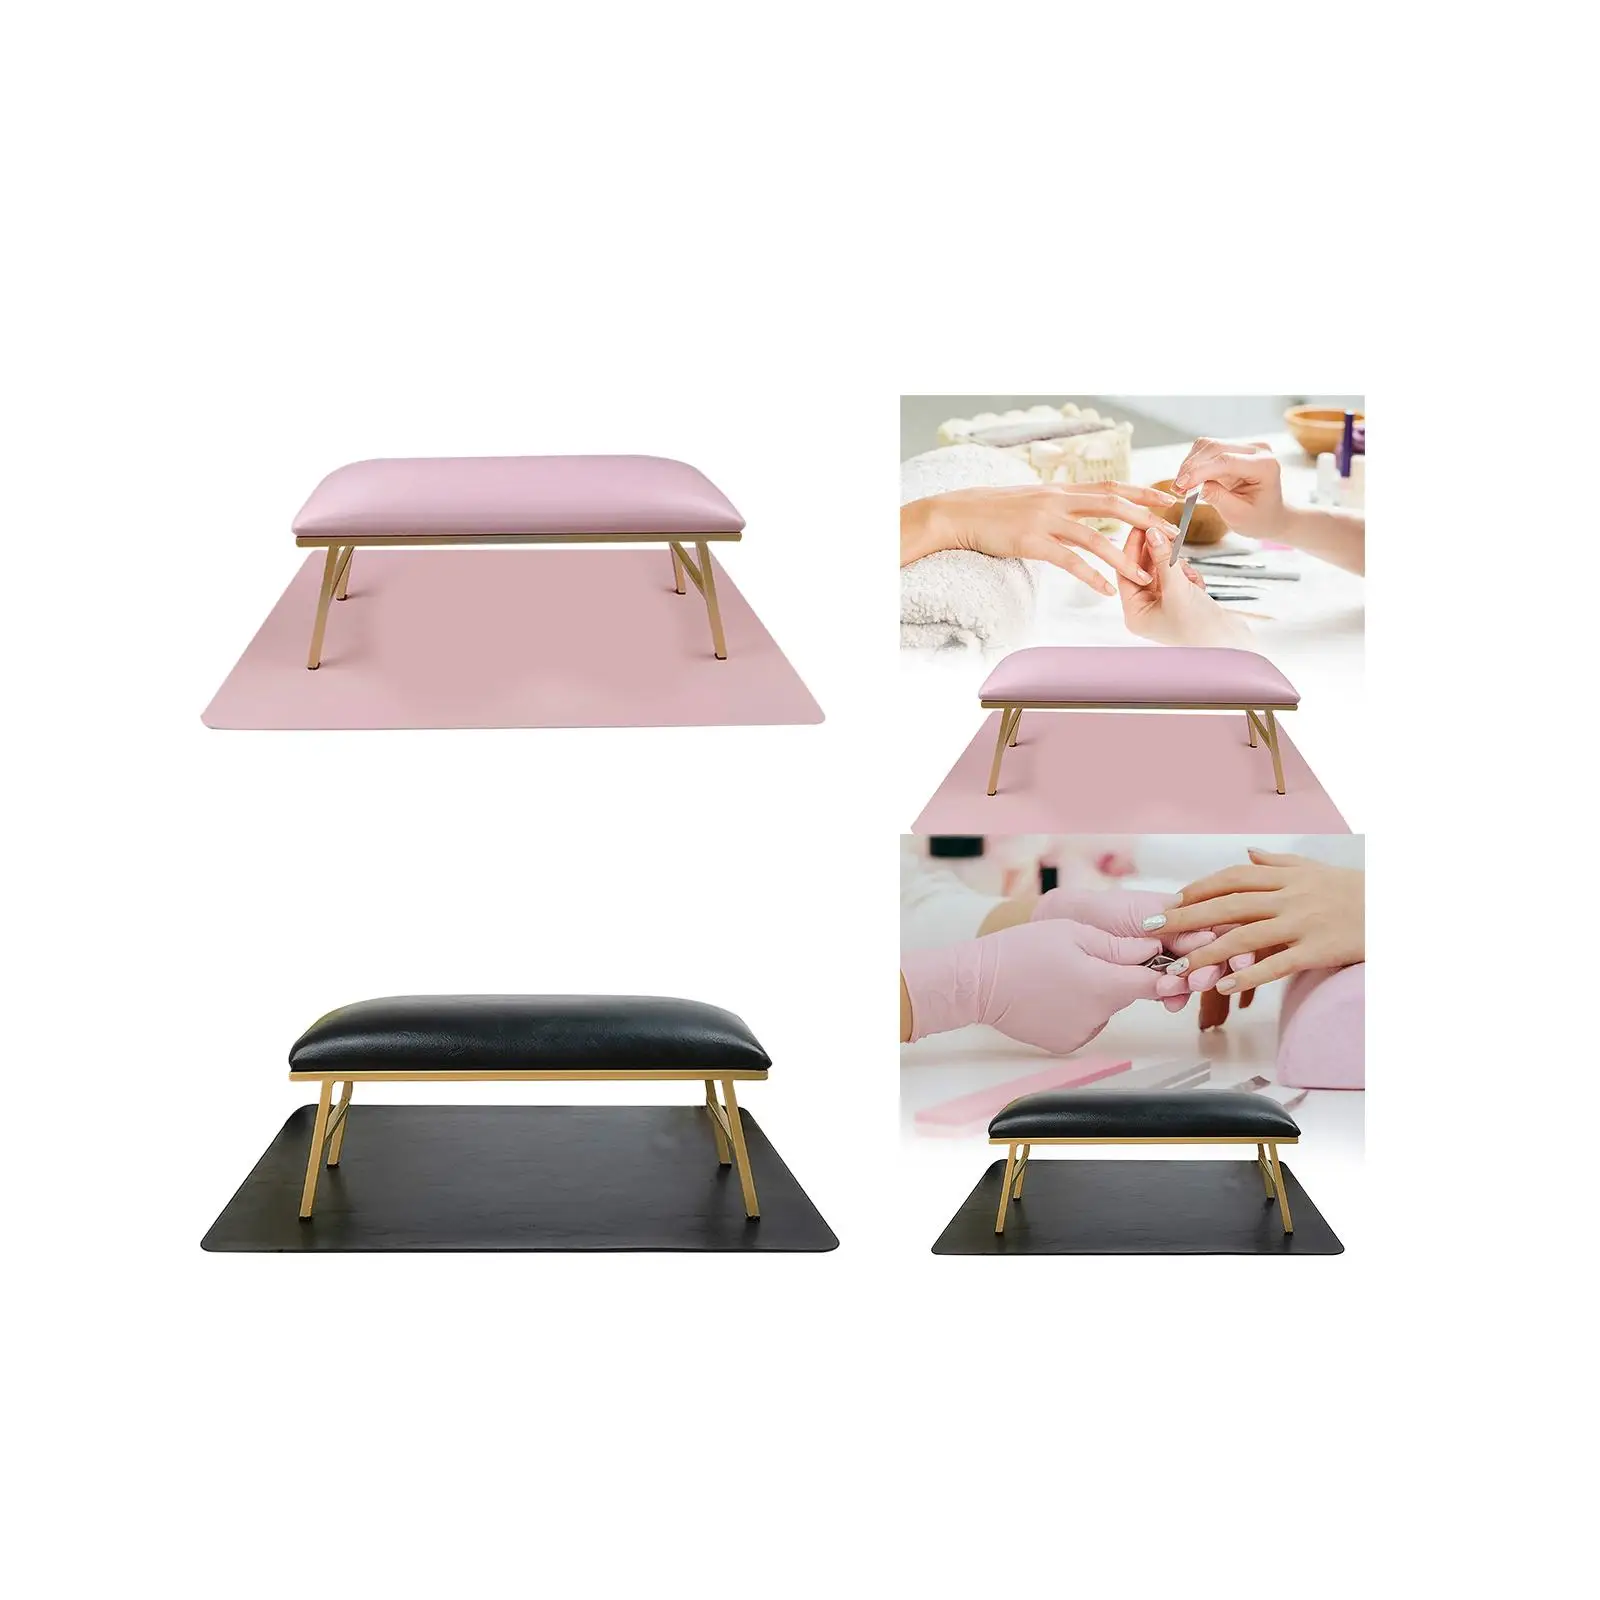 Nail Hand Pillow and Mat, Nail Table Mat Soft Non Slip Nail Hand Rest Manicure Tool, for Manicurist Nail Techs Use Nail Art